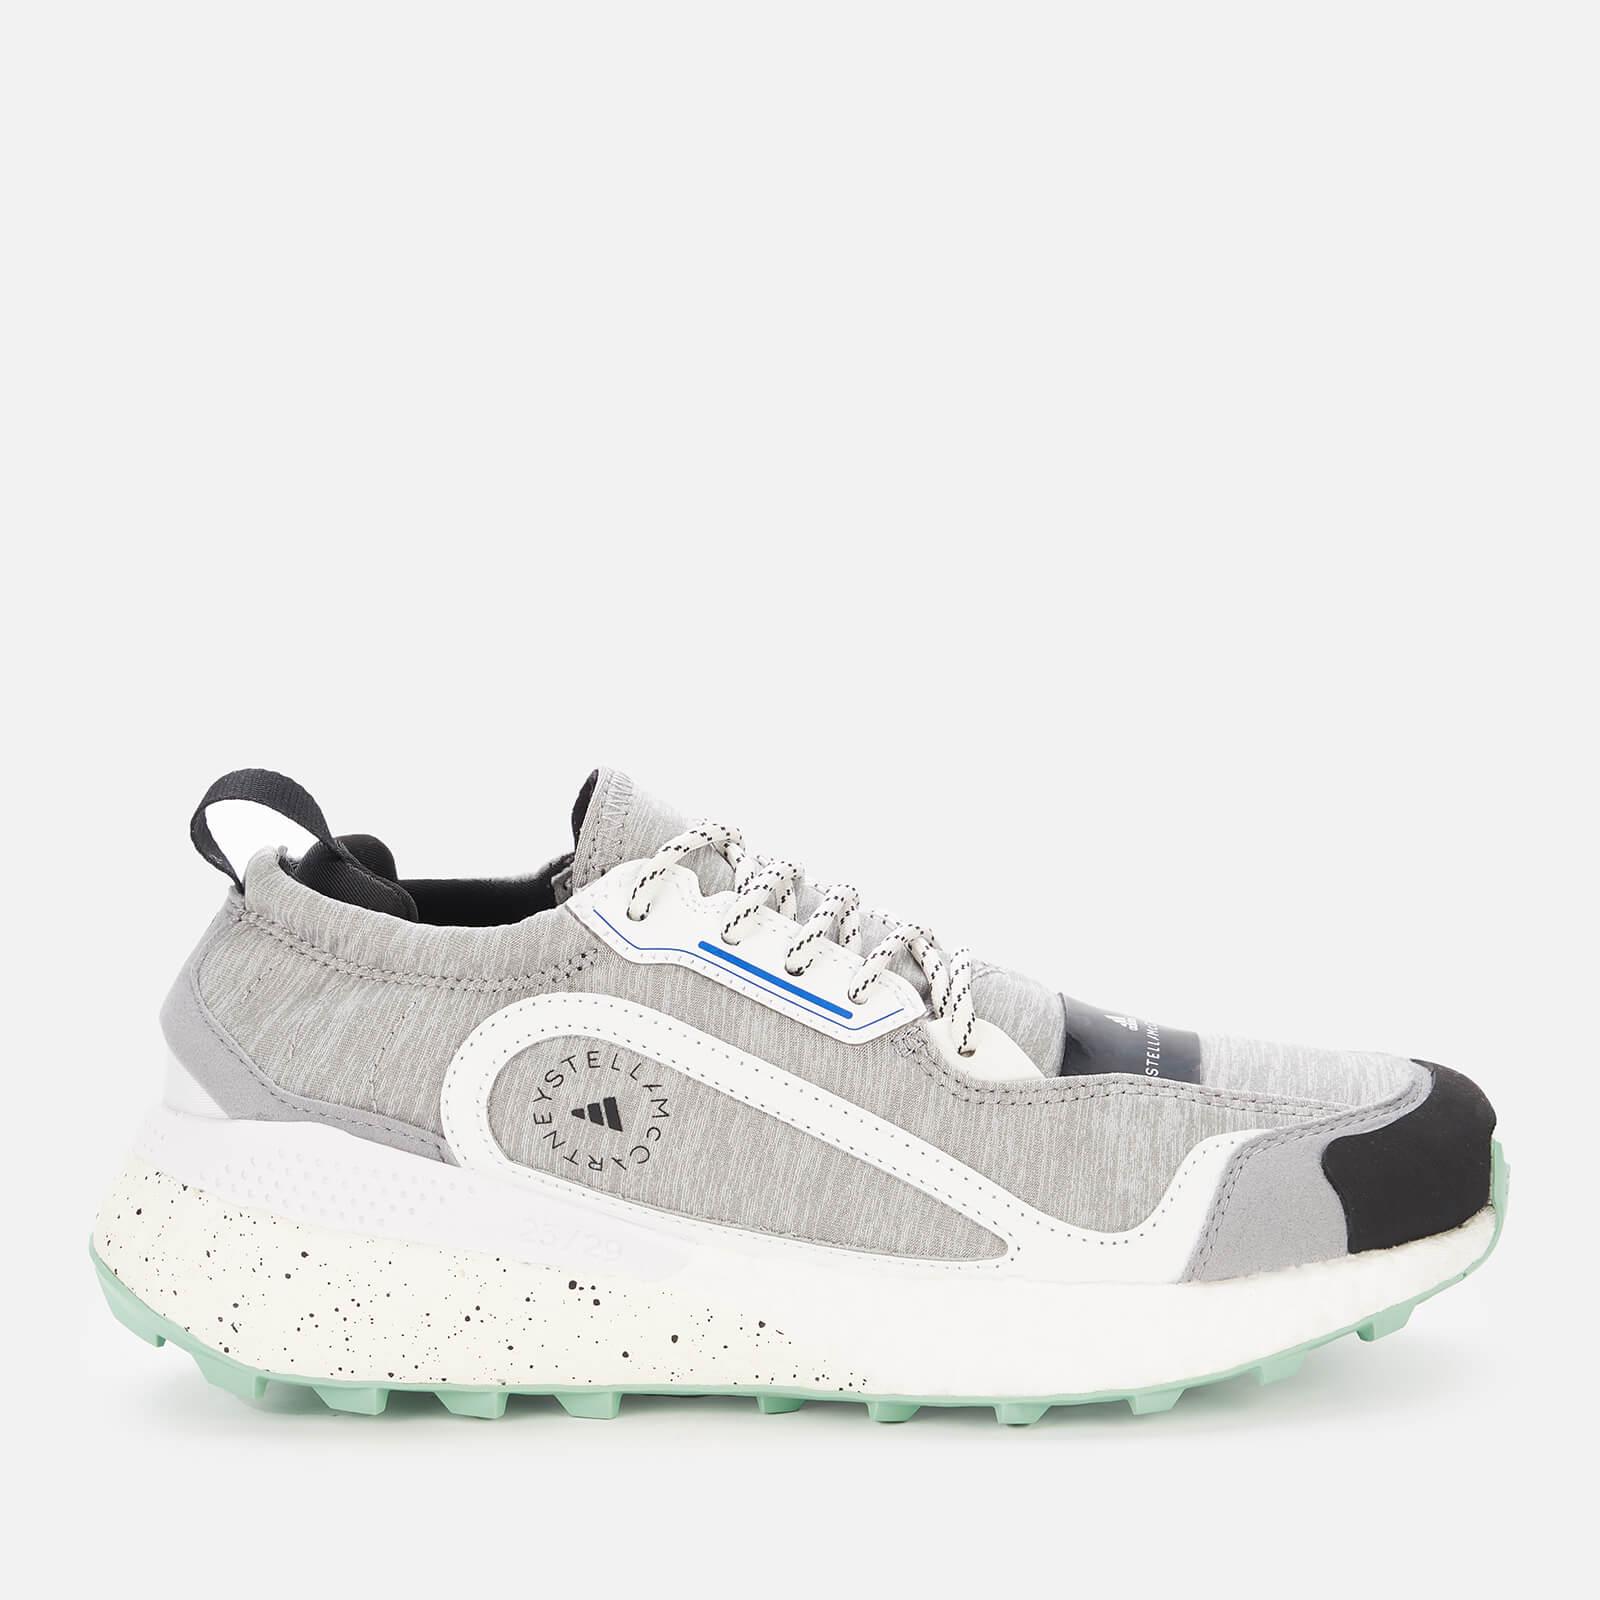 adidas By Stella McCartney Leather Outdoorboost 2.0 Heather Trainers in  Grey (Gray) | Lyst